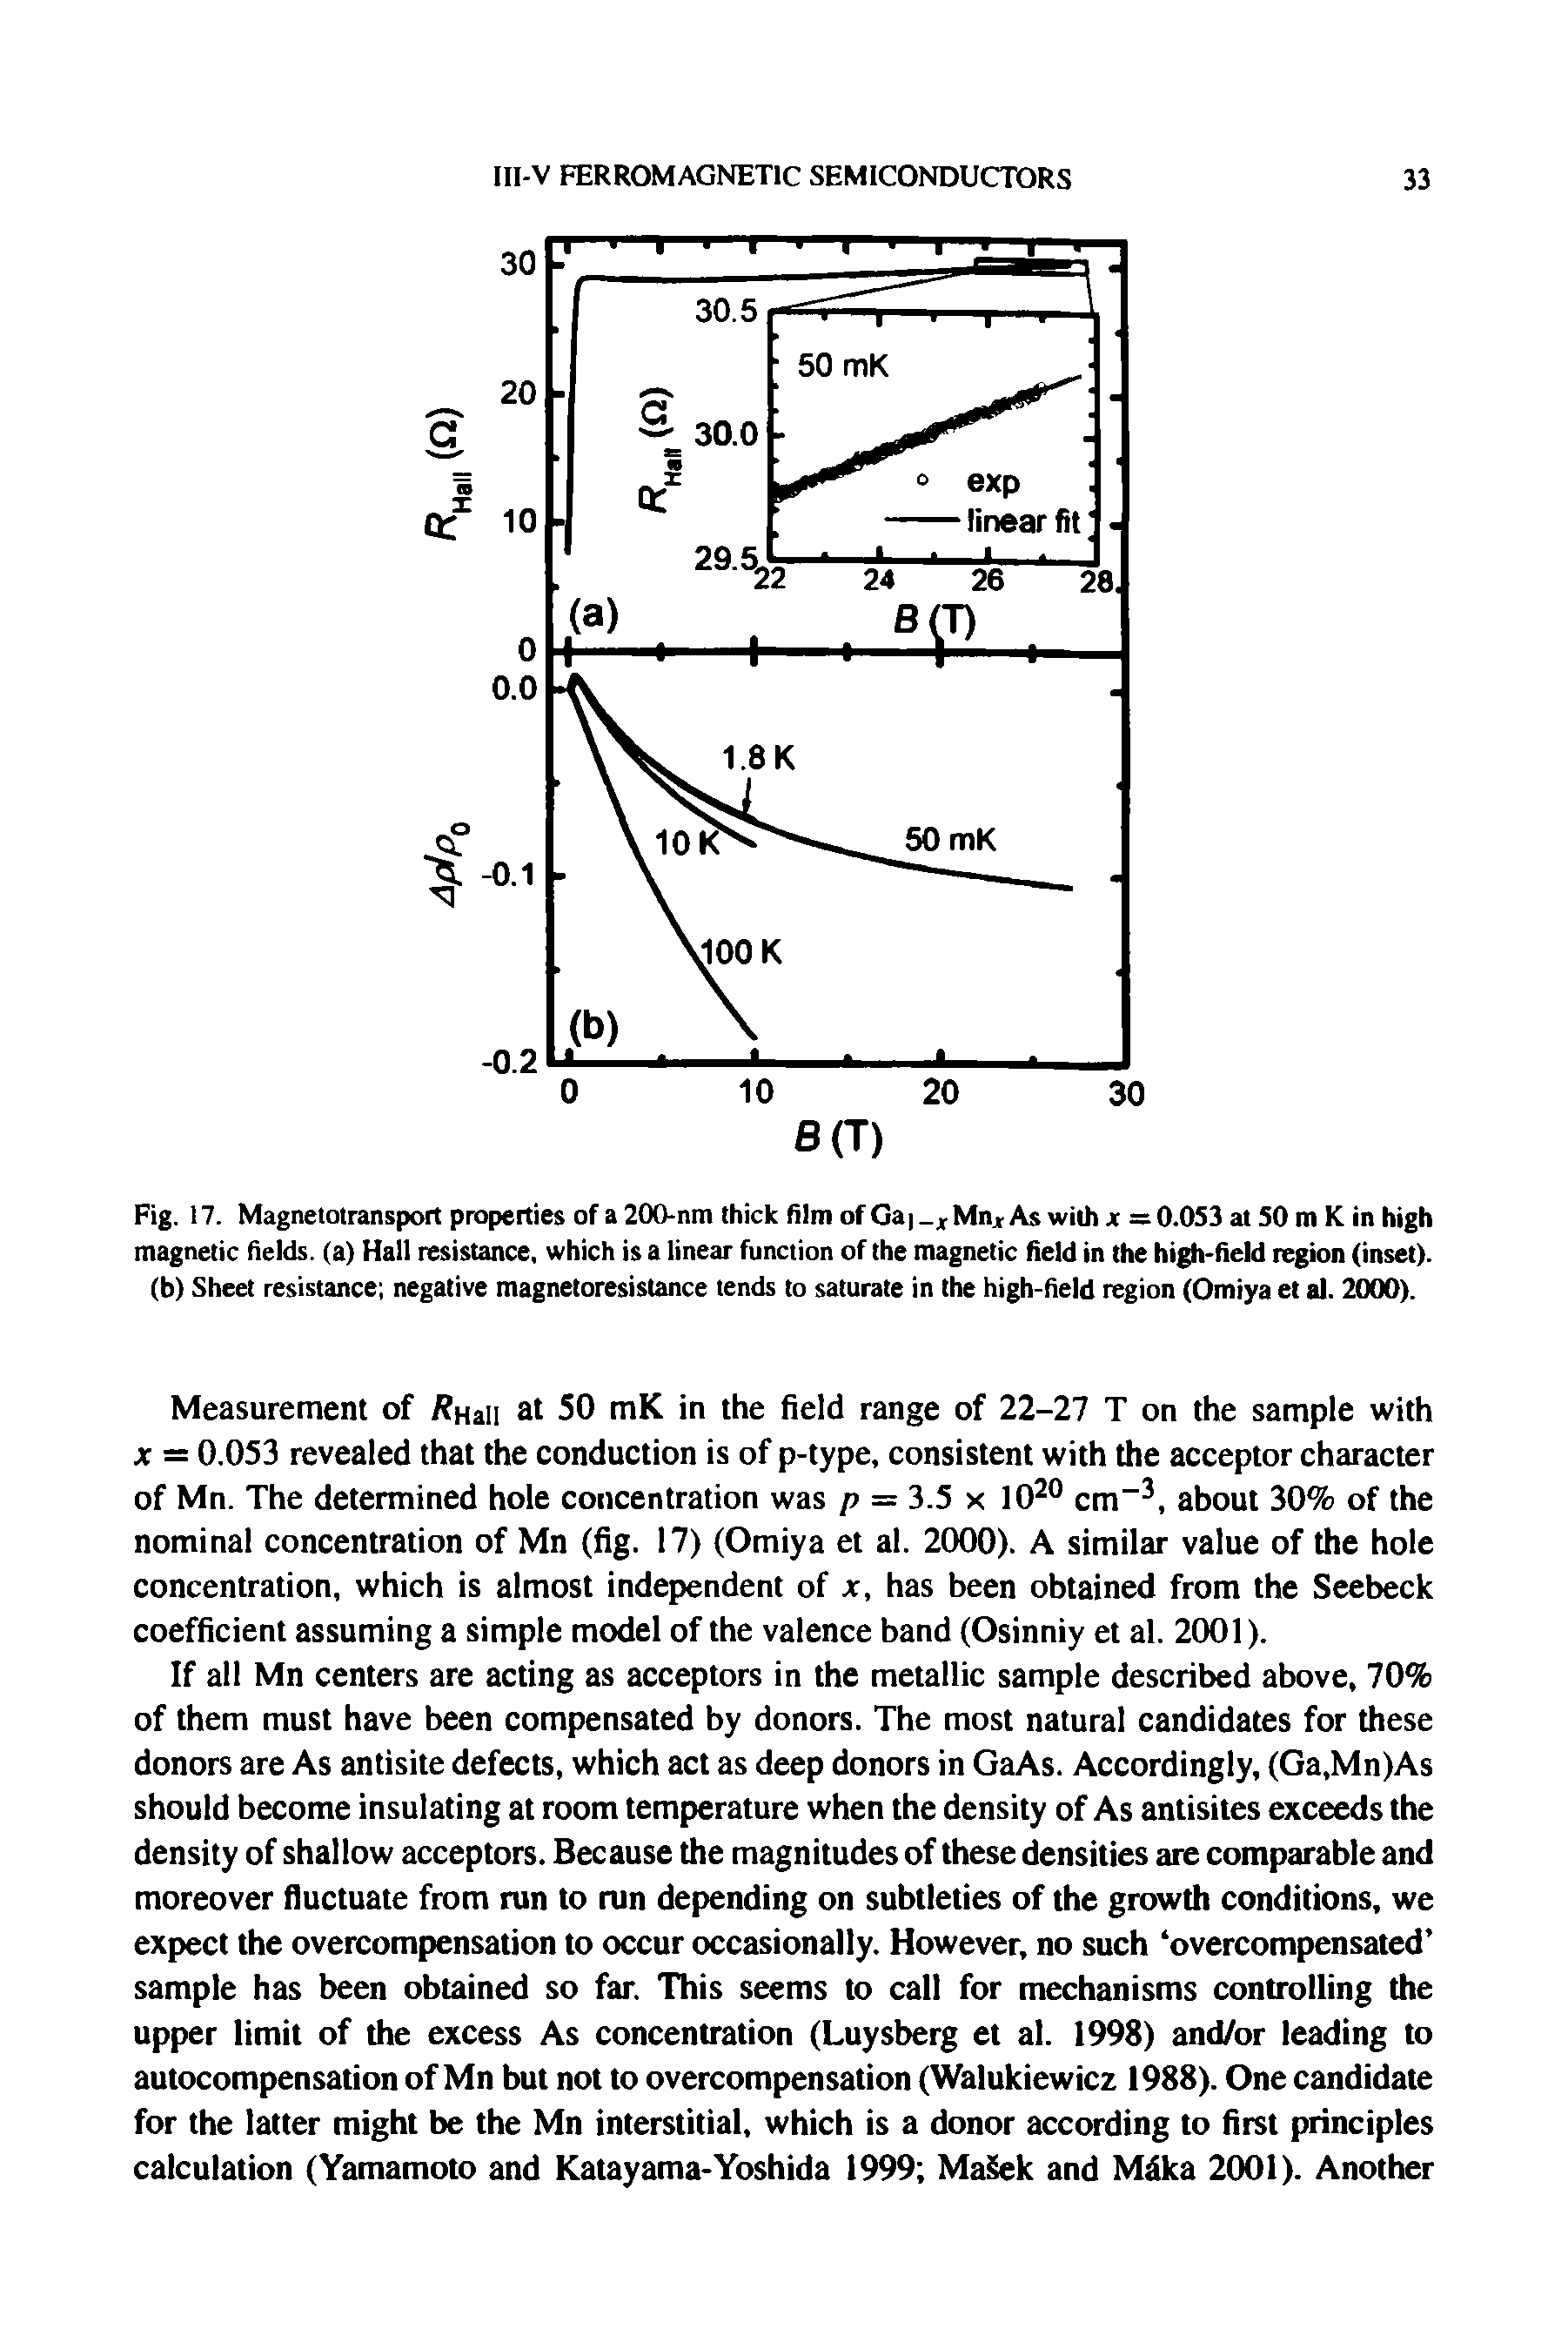 Fig. 17. Magnetotransport properties of a 200-nm thick film of Ga -x Mnr As with x = 0.0S3 at 50 m K in high magnetic fields, (a) Hall resistance, which is a linear function of the magnetic field in the high-field region (inset), (b) Sheet resistance negative magnetoresistance tends to saturate in the high-field region (Omiya et al. 2000).